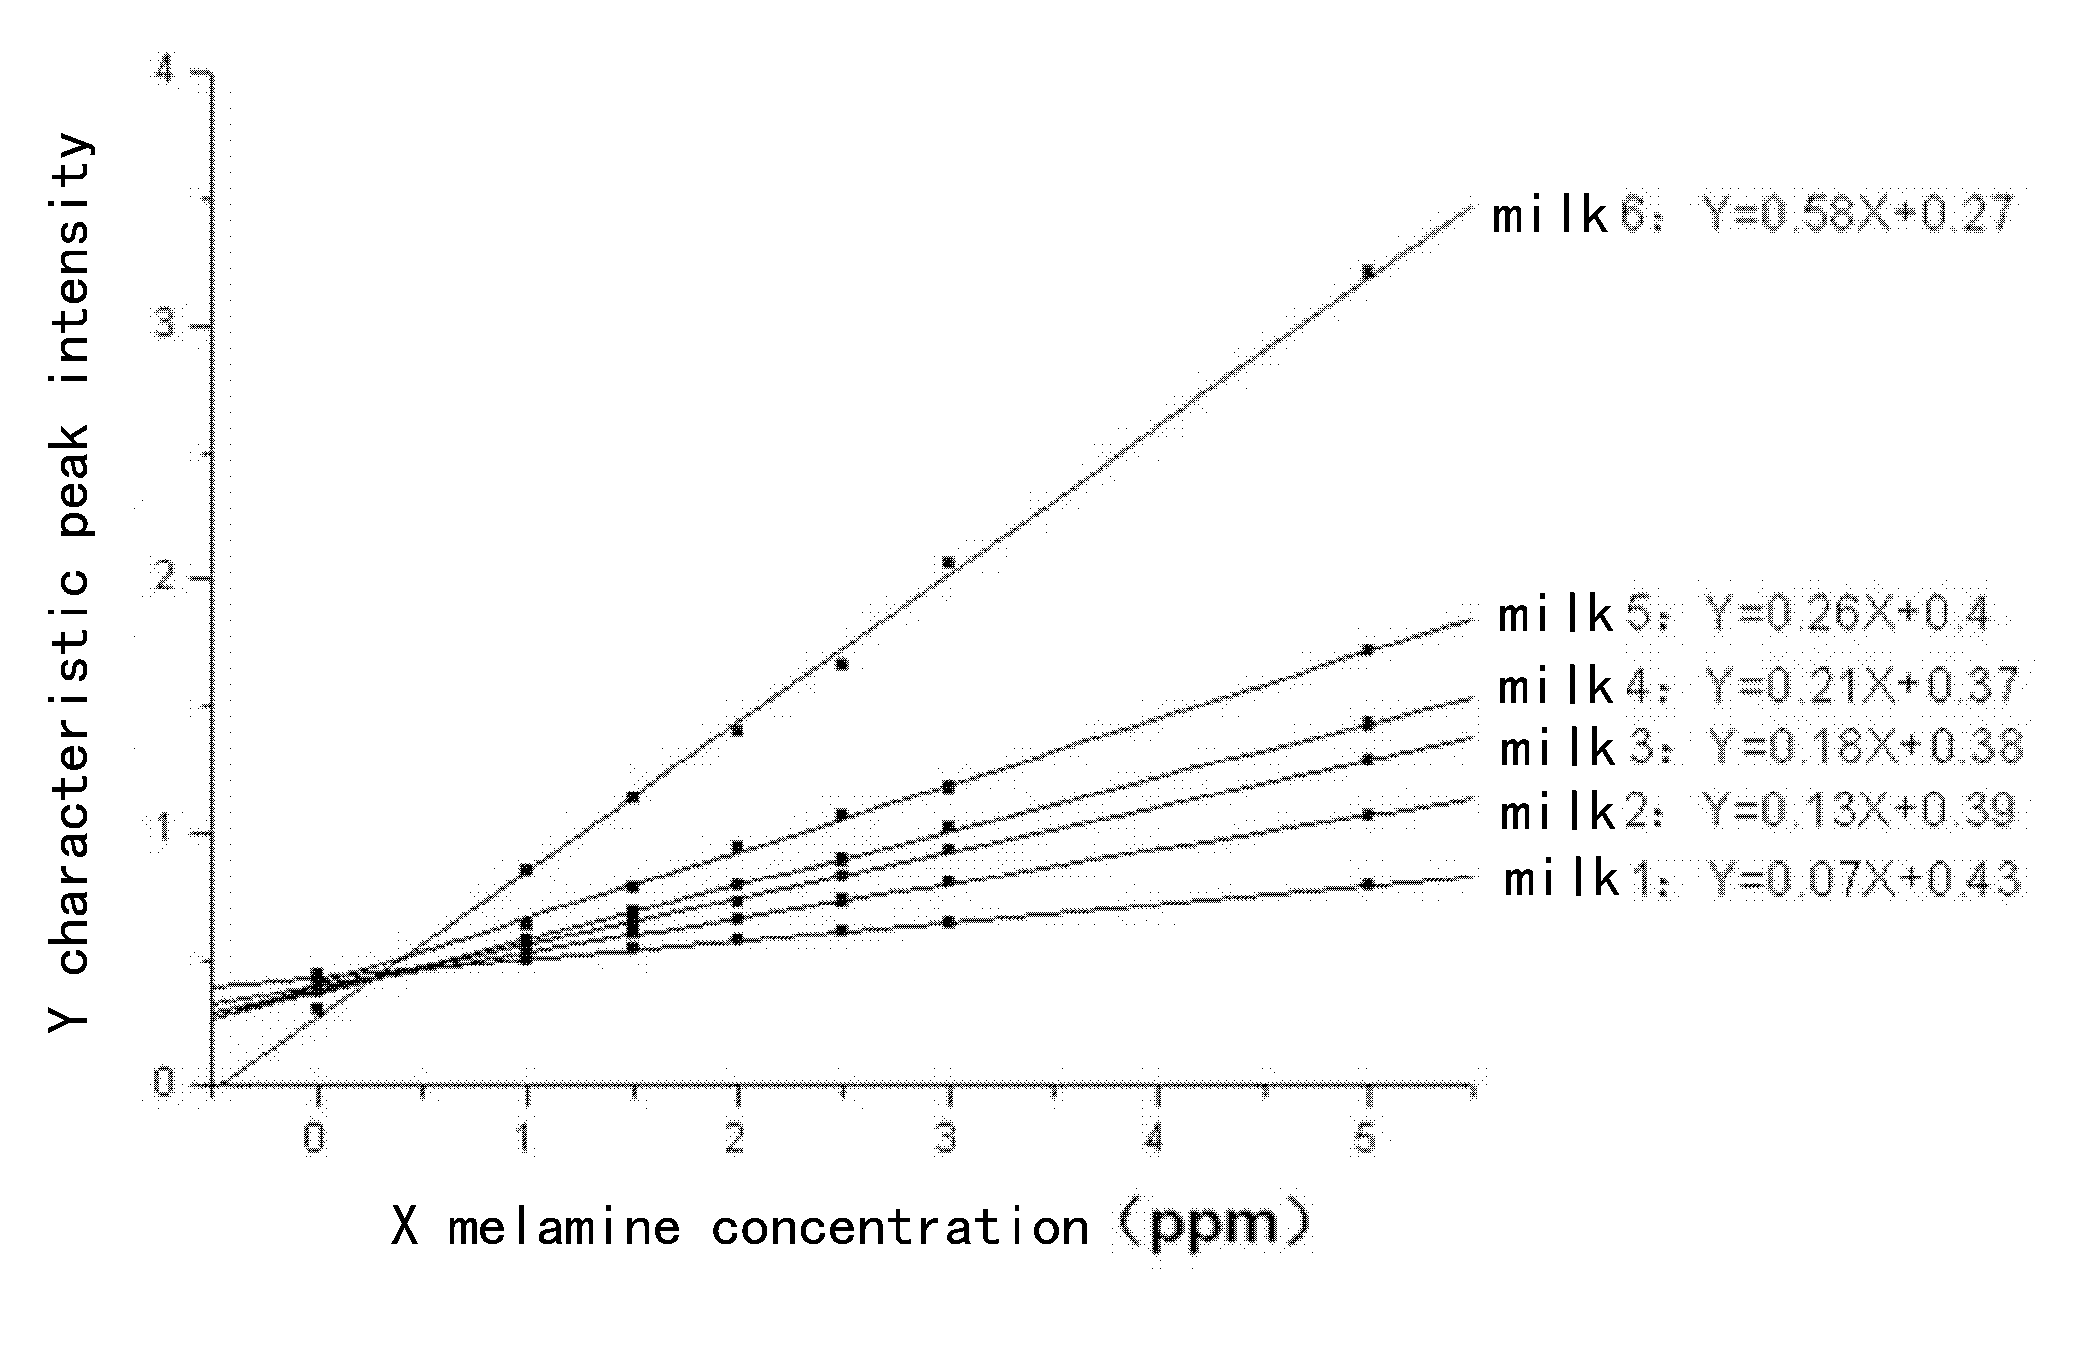 Raman spectroscopy method of measuring melamine contents in dairy products having different matrixes